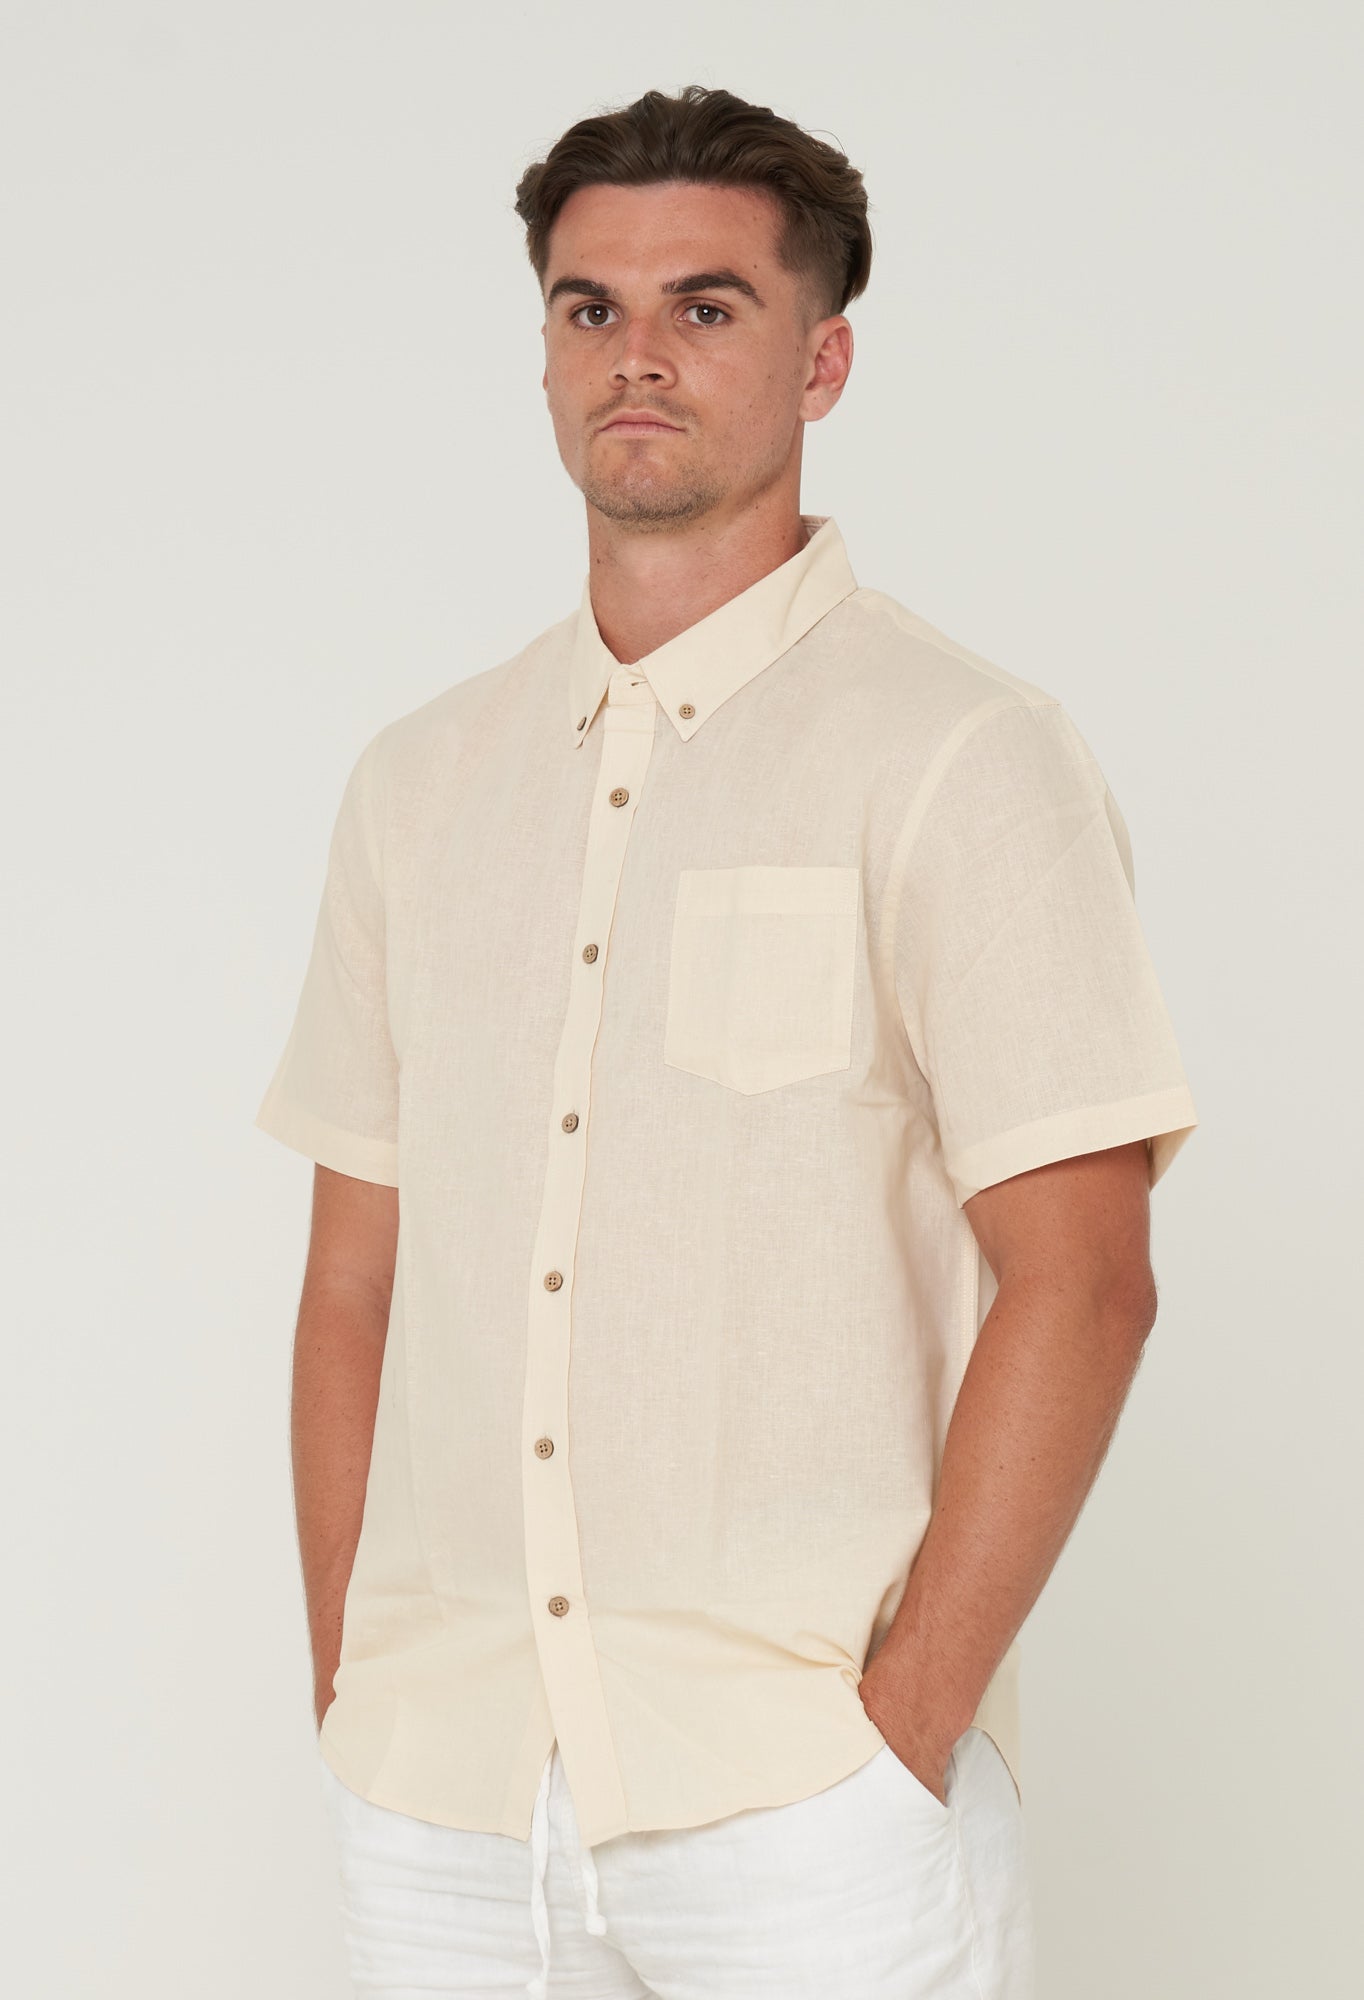 NL Hastings St Cream Button up Shirt